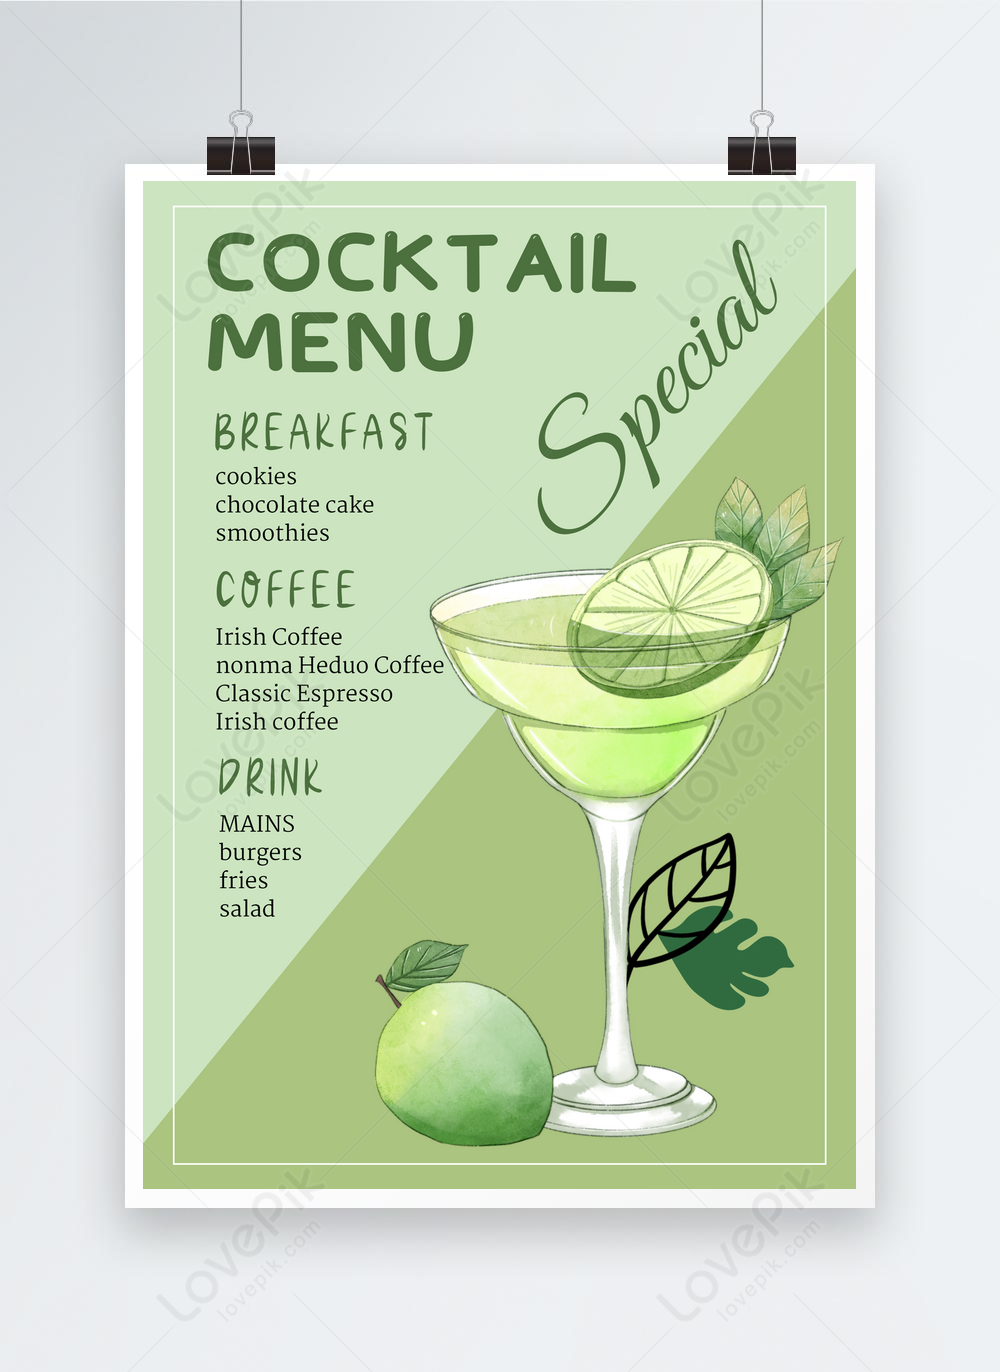 watercolor-summer-cocktail-menu-template-image-picture-free-download-466591753-lovepik